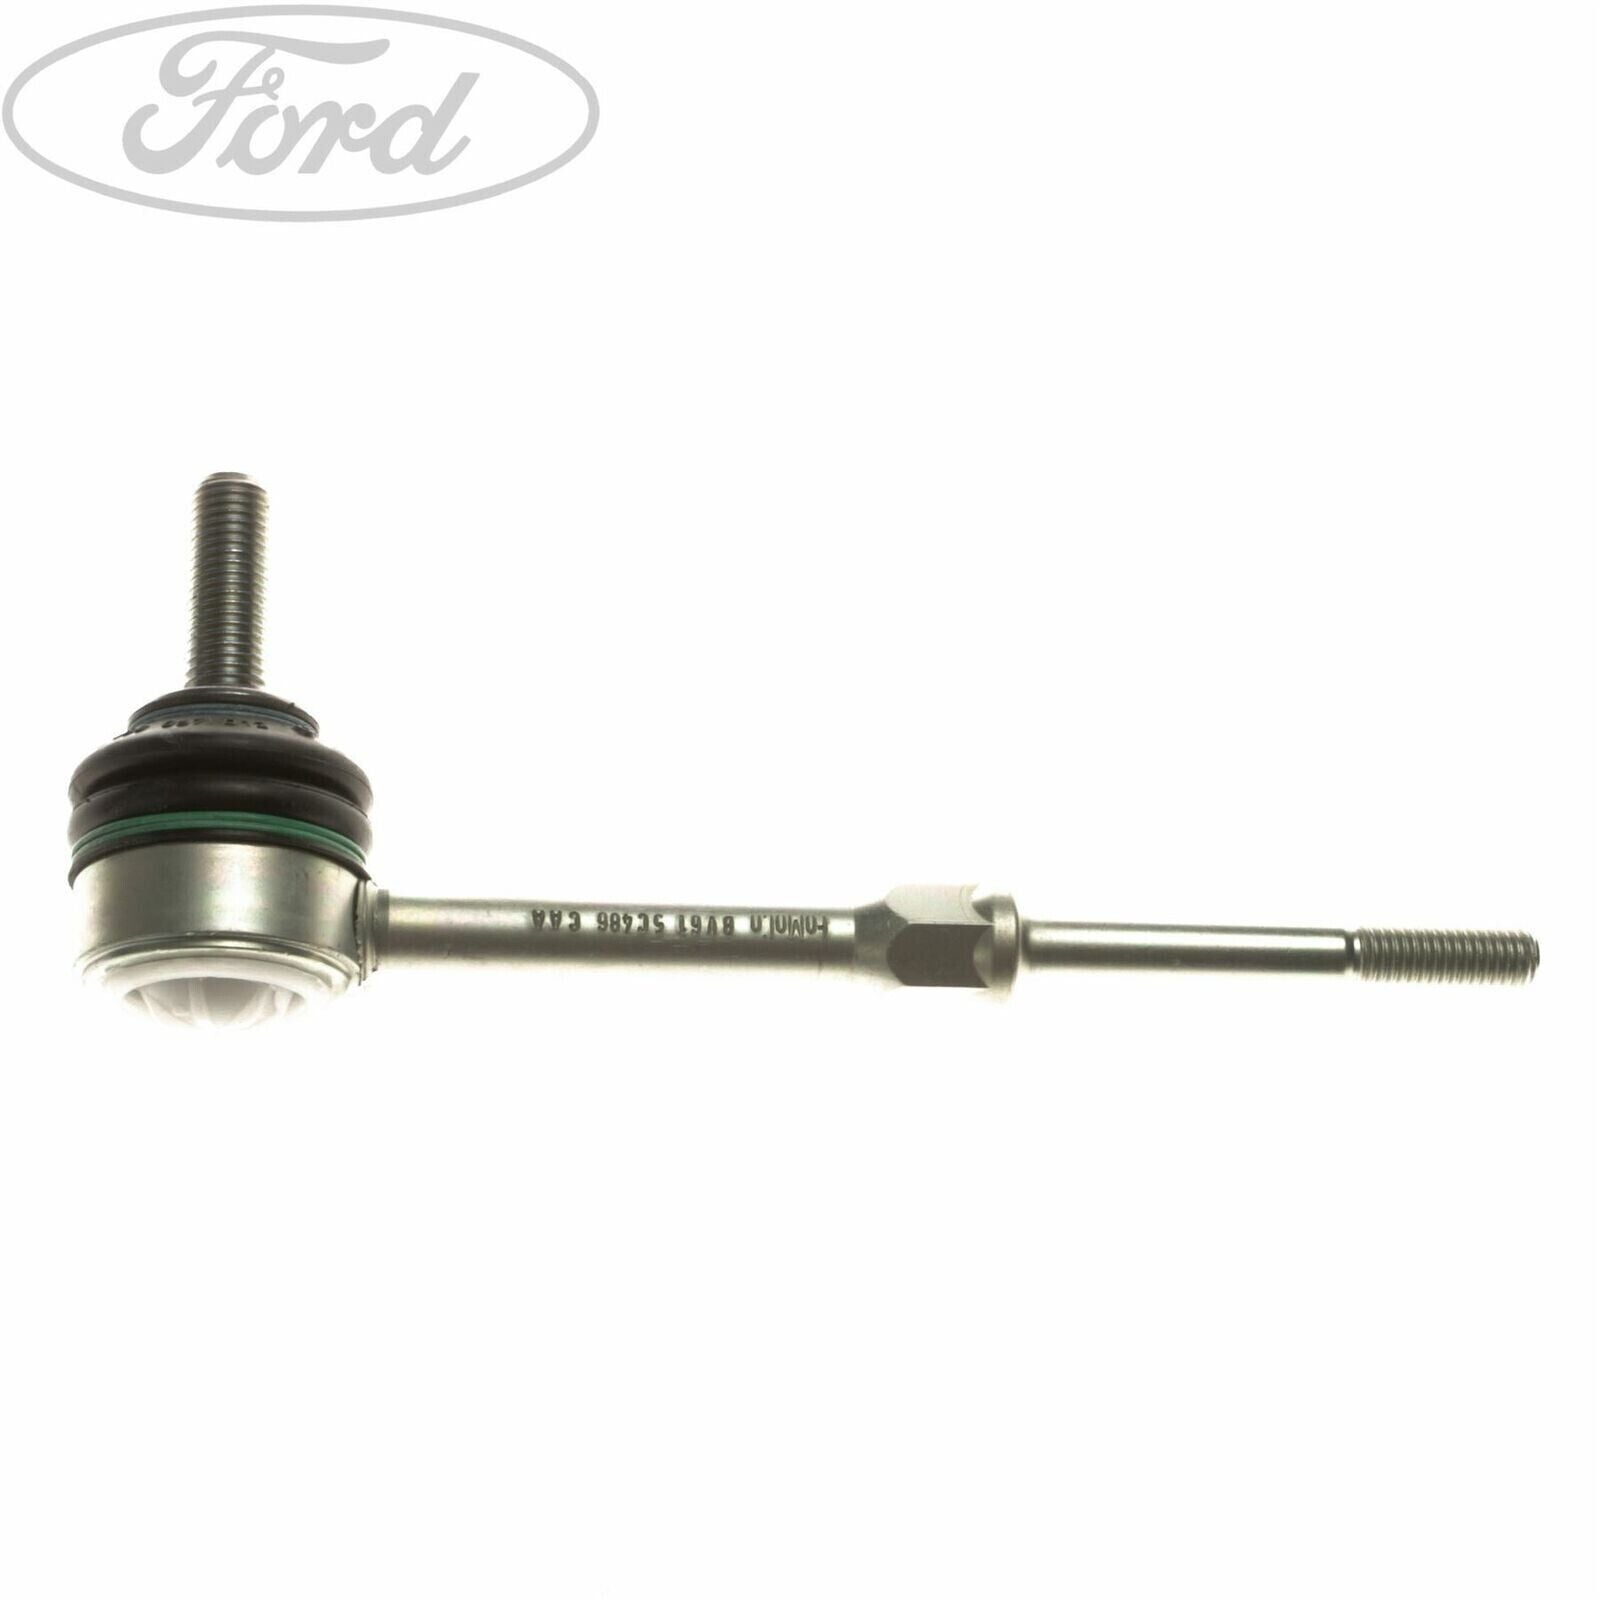 MK3 Focus ST ST250 rear anti-roll bar drop link with bushes Genuine Ford - Wayside Performance 